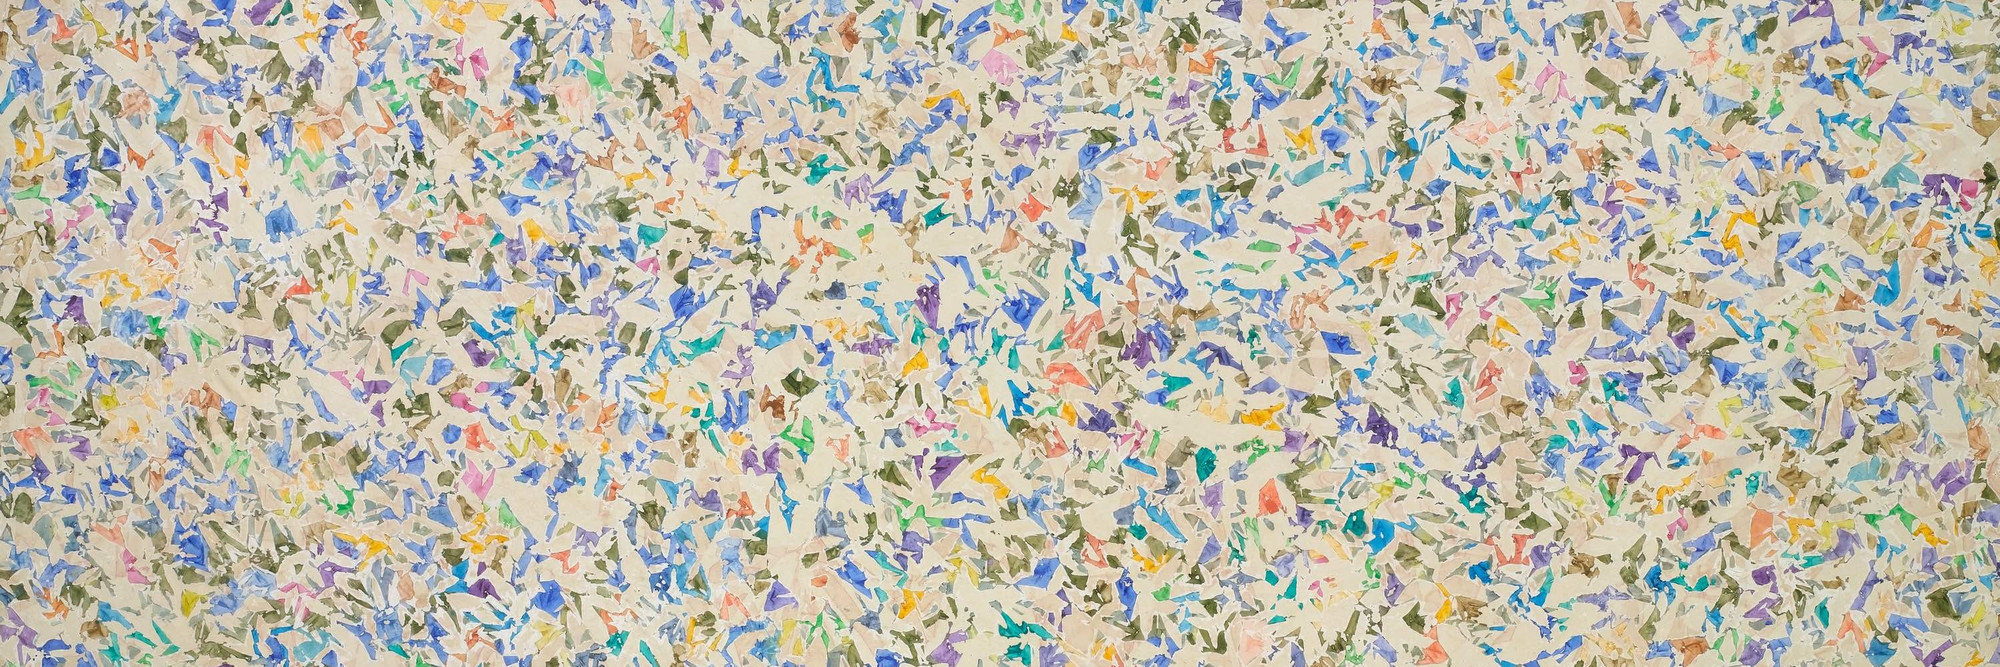 Simon Hantaï. Untitled [Suite &#34;Blancs&#34;]. 1973. Acrylic on canvas, 10&#39; 1/4&#34; x 15&#39; 3 1/4&#34; (305.3 x 466.5 cm). Acquired through the Carol Buttenwieser Loeb and Arnold A. Saltzman Funds